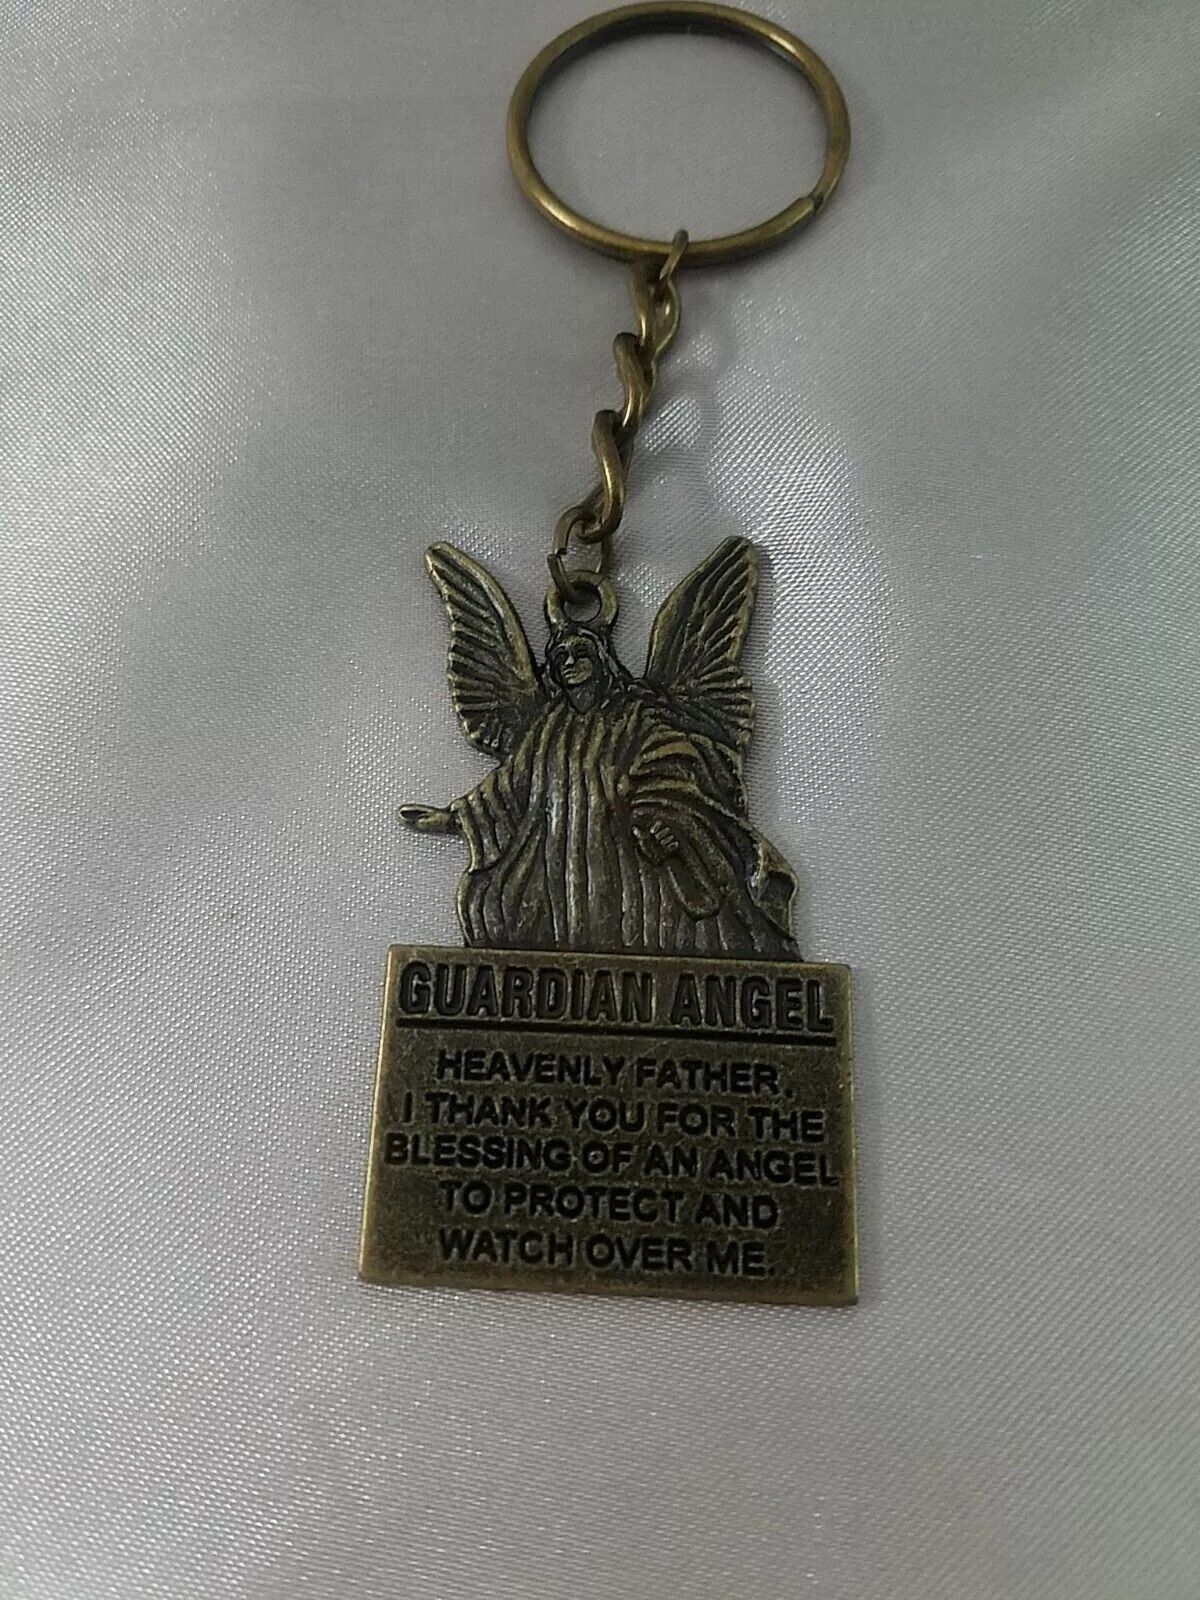 Vintage Guardian Angel Brass Tone Metal Keychain “Heavenly Father I Thank You”